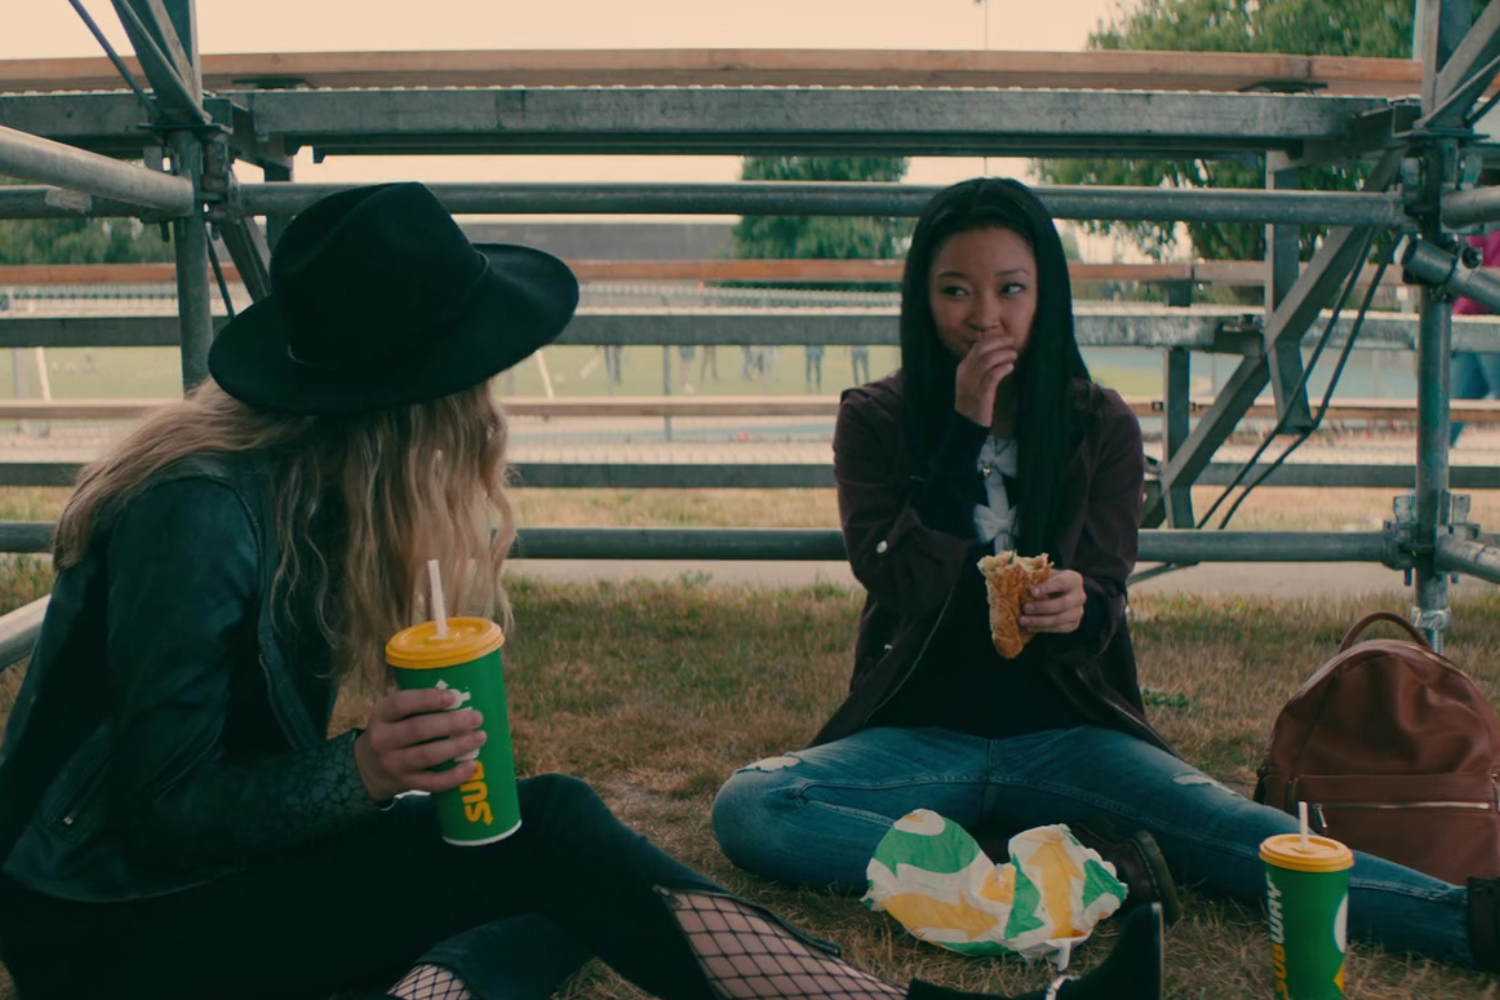 a Subway product placement in the film To All the Boys I've Loved Before